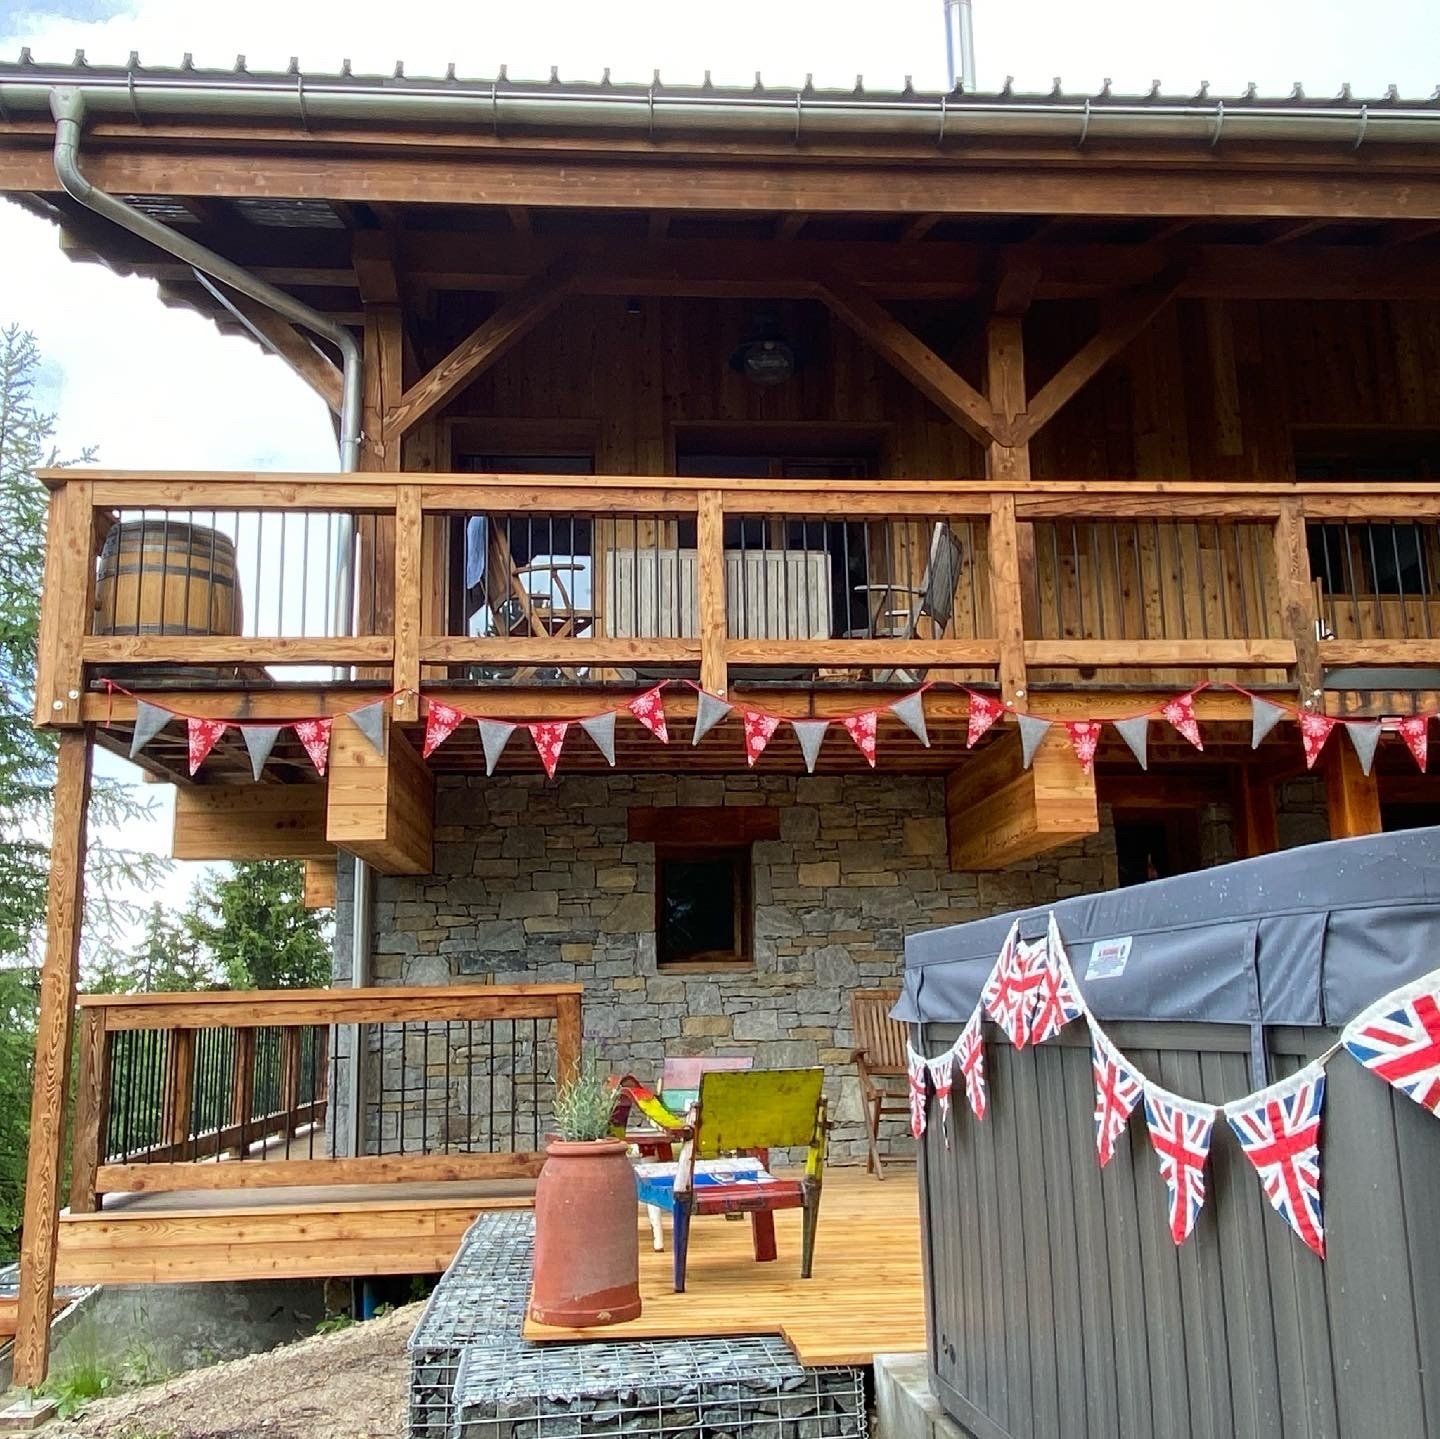 Chalet Marmotte Decked with Bunting